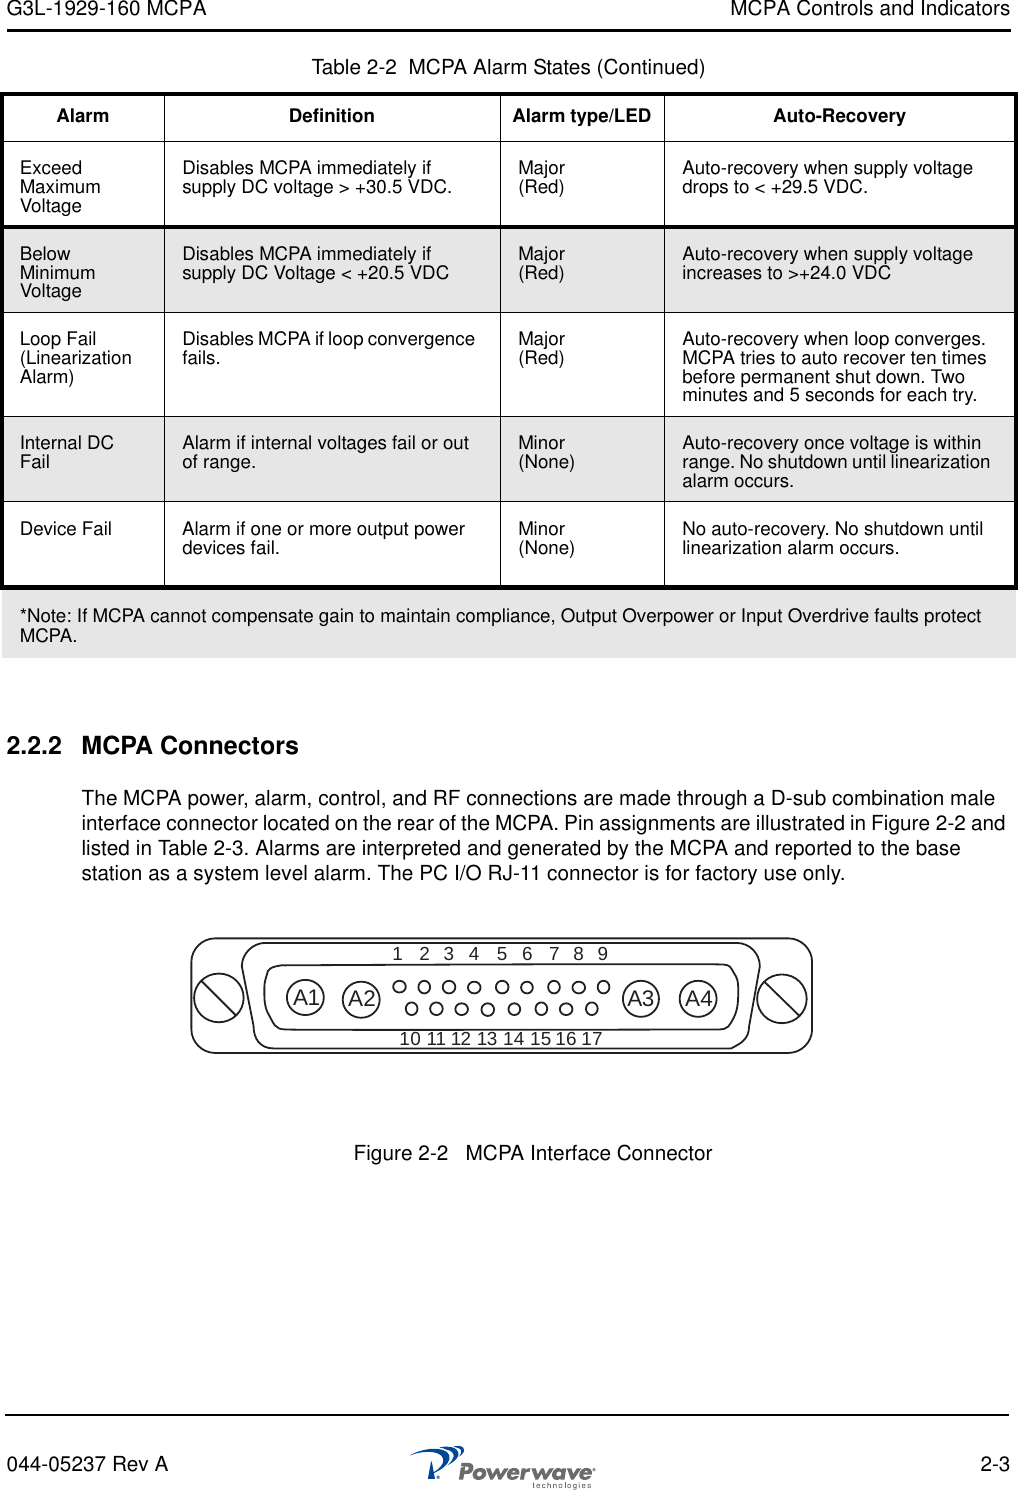 G3L-1929-160 MCPA MCPA Controls and Indicators044-05237 Rev A 2-32.2.2 MCPA ConnectorsThe MCPA power, alarm, control, and RF connections are made through a D-sub combination male interface connector located on the rear of the MCPA. Pin assignments are illustrated in Figure 2-2 and listed in Table 2-3. Alarms are interpreted and generated by the MCPA and reported to the base station as a system level alarm. The PC I/O RJ-11 connector is for factory use only.Exceed Maximum VoltageDisables MCPA immediately if supply DC voltage &gt; +30.5 VDC. Major(Red) Auto-recovery when supply voltage drops to &lt; +29.5 VDC.Below Minimum VoltageDisables MCPA immediately if supply DC Voltage &lt; +20.5 VDC Major(Red) Auto-recovery when supply voltage increases to &gt;+24.0 VDCLoop Fail (Linearization Alarm)Disables MCPA if loop convergence fails. Major(Red) Auto-recovery when loop converges. MCPA tries to auto recover ten times before permanent shut down. Two minutes and 5 seconds for each try.Internal DC Fail Alarm if internal voltages fail or out of range. Minor(None) Auto-recovery once voltage is within range. No shutdown until linearization alarm occurs.Device Fail Alarm if one or more output power devices fail. Minor(None) No auto-recovery. No shutdown until linearization alarm occurs.*Note: If MCPA cannot compensate gain to maintain compliance, Output Overpower or Input Overdrive faults protect MCPA.Table 2-2  MCPA Alarm States (Continued)Alarm Definition Alarm type/LED Auto-Recovery123A1 A2 A3 A445678910 11 12 13 14 15 16 17Figure 2-2   MCPA Interface Connector